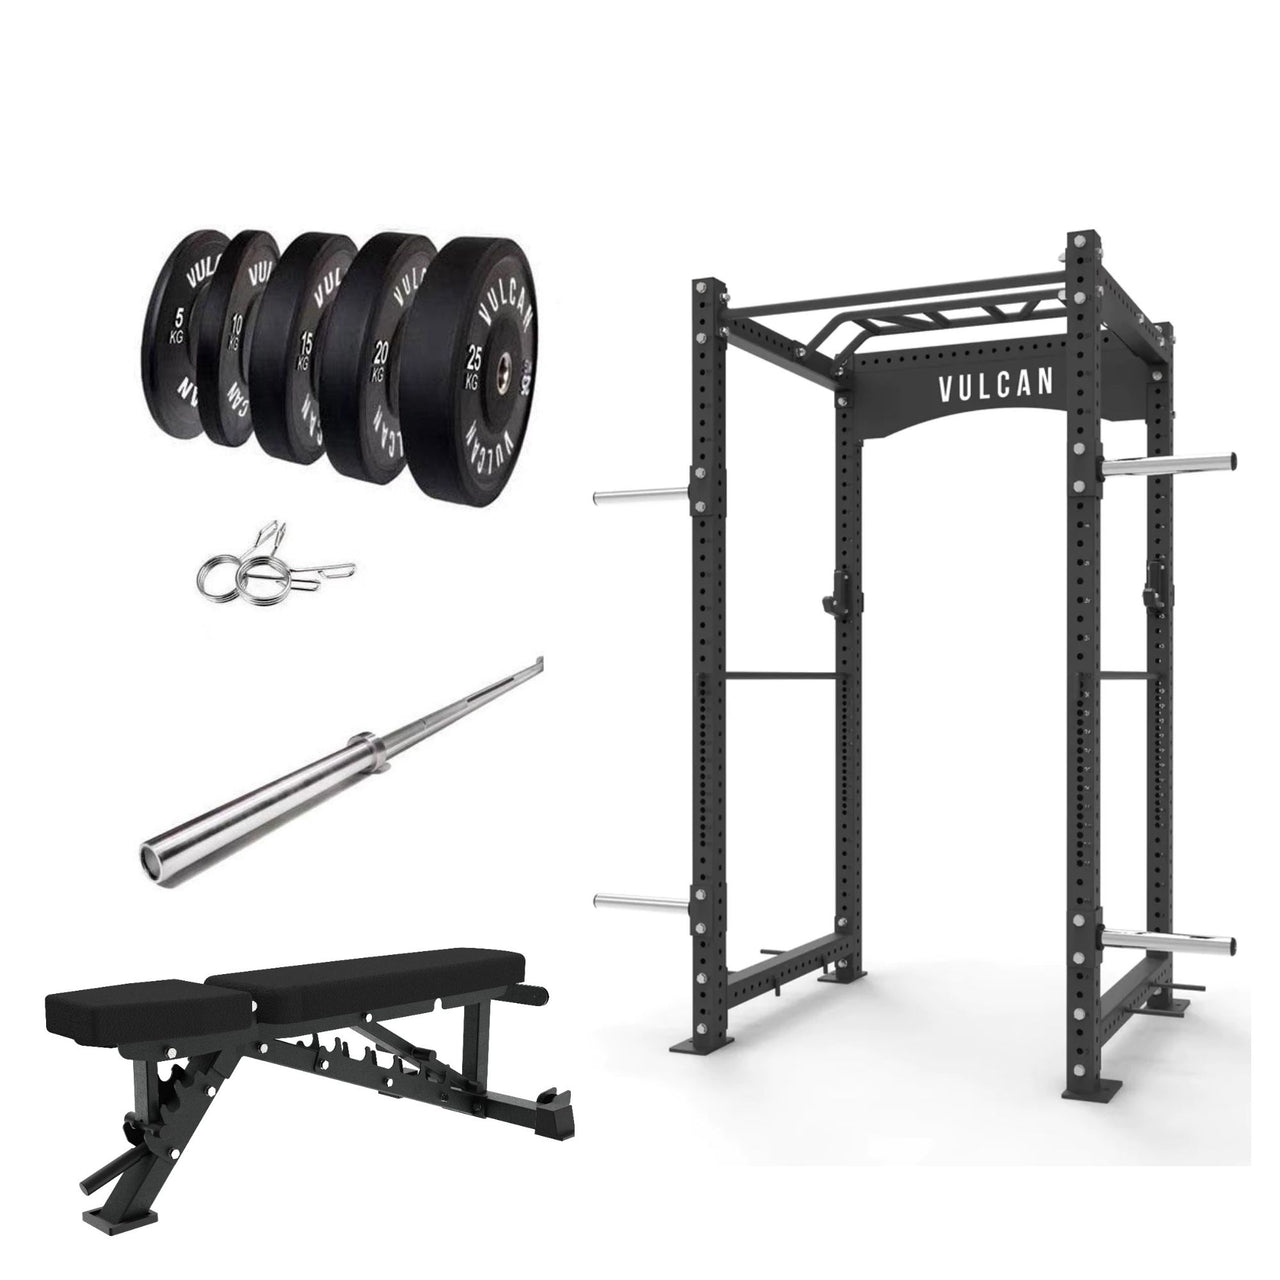 VULCAN Commercial Power Rack, Olympic Barbell, 150kg Black Bumper Weight Plates & Adjustable Bench | IN STOCK